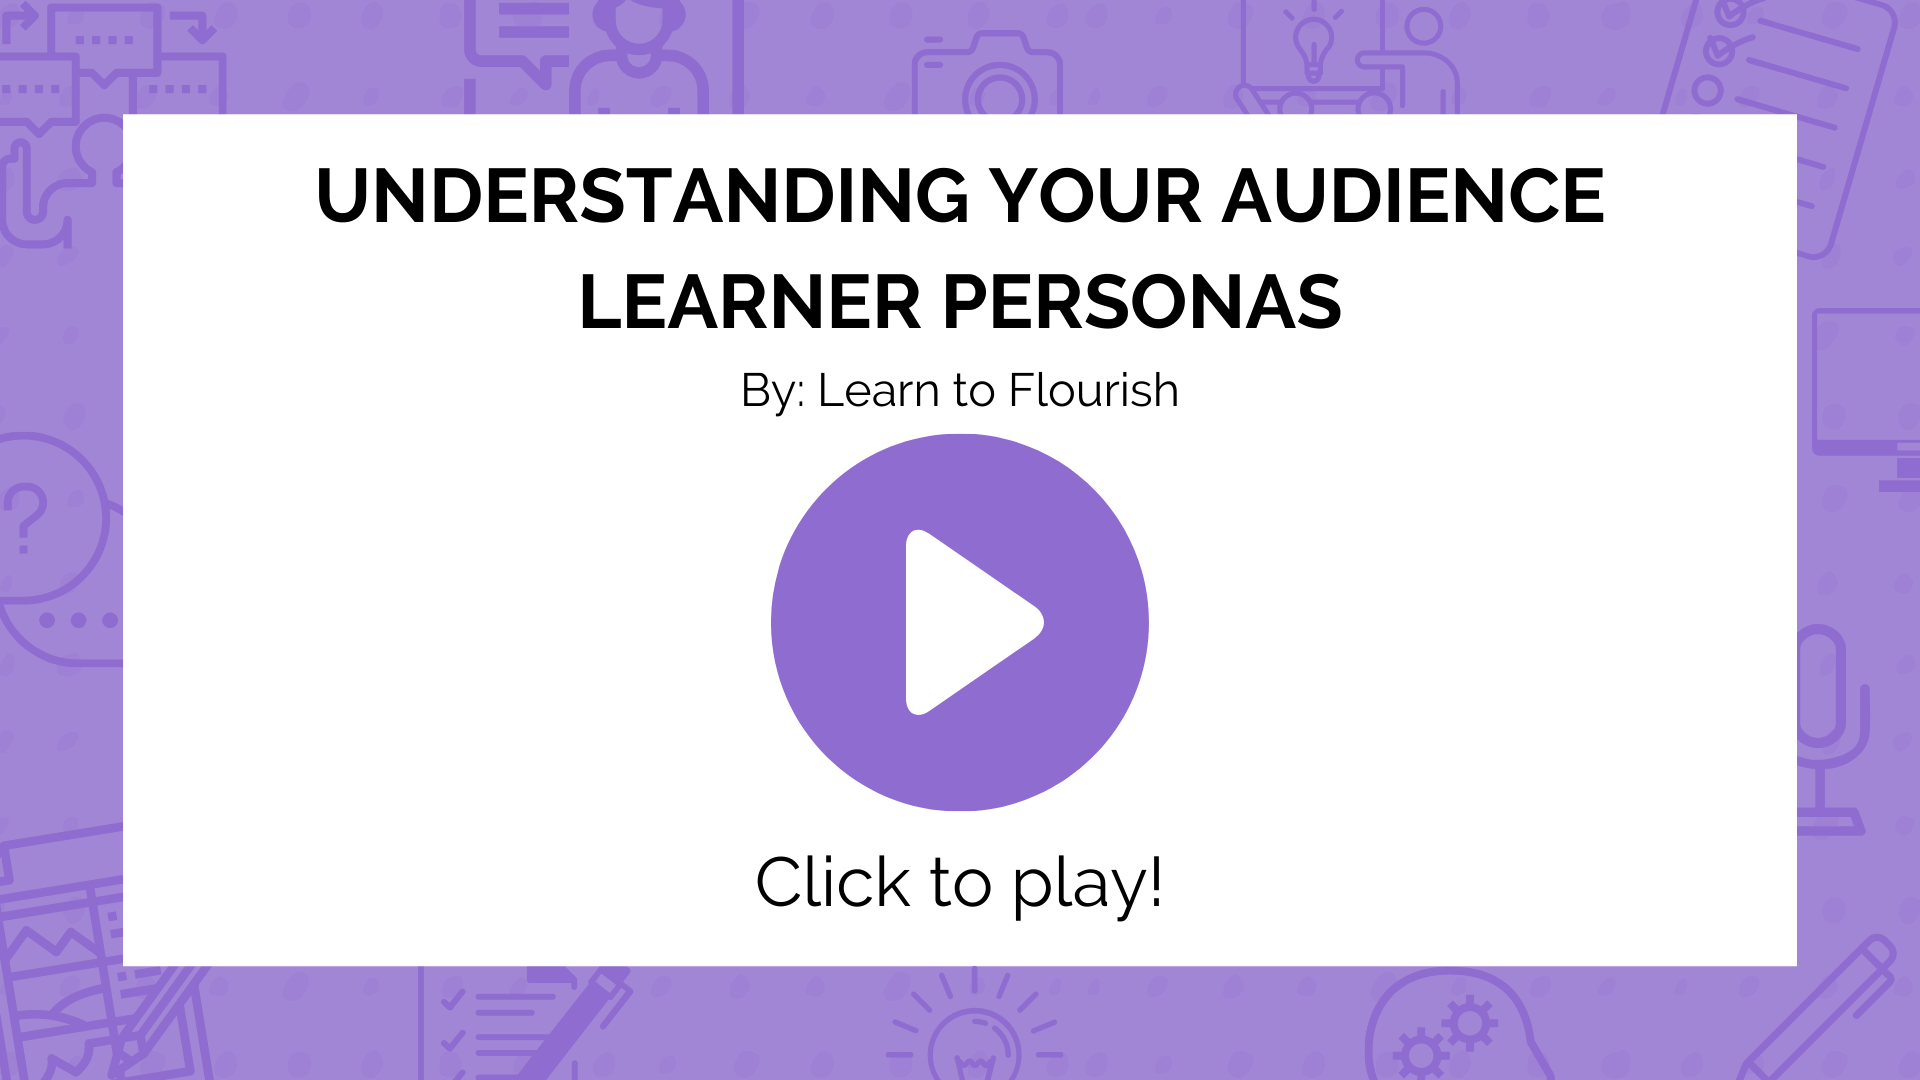 Click this image to open a YouTube video in a new tab, called Understanding Your Audience Learner Personas